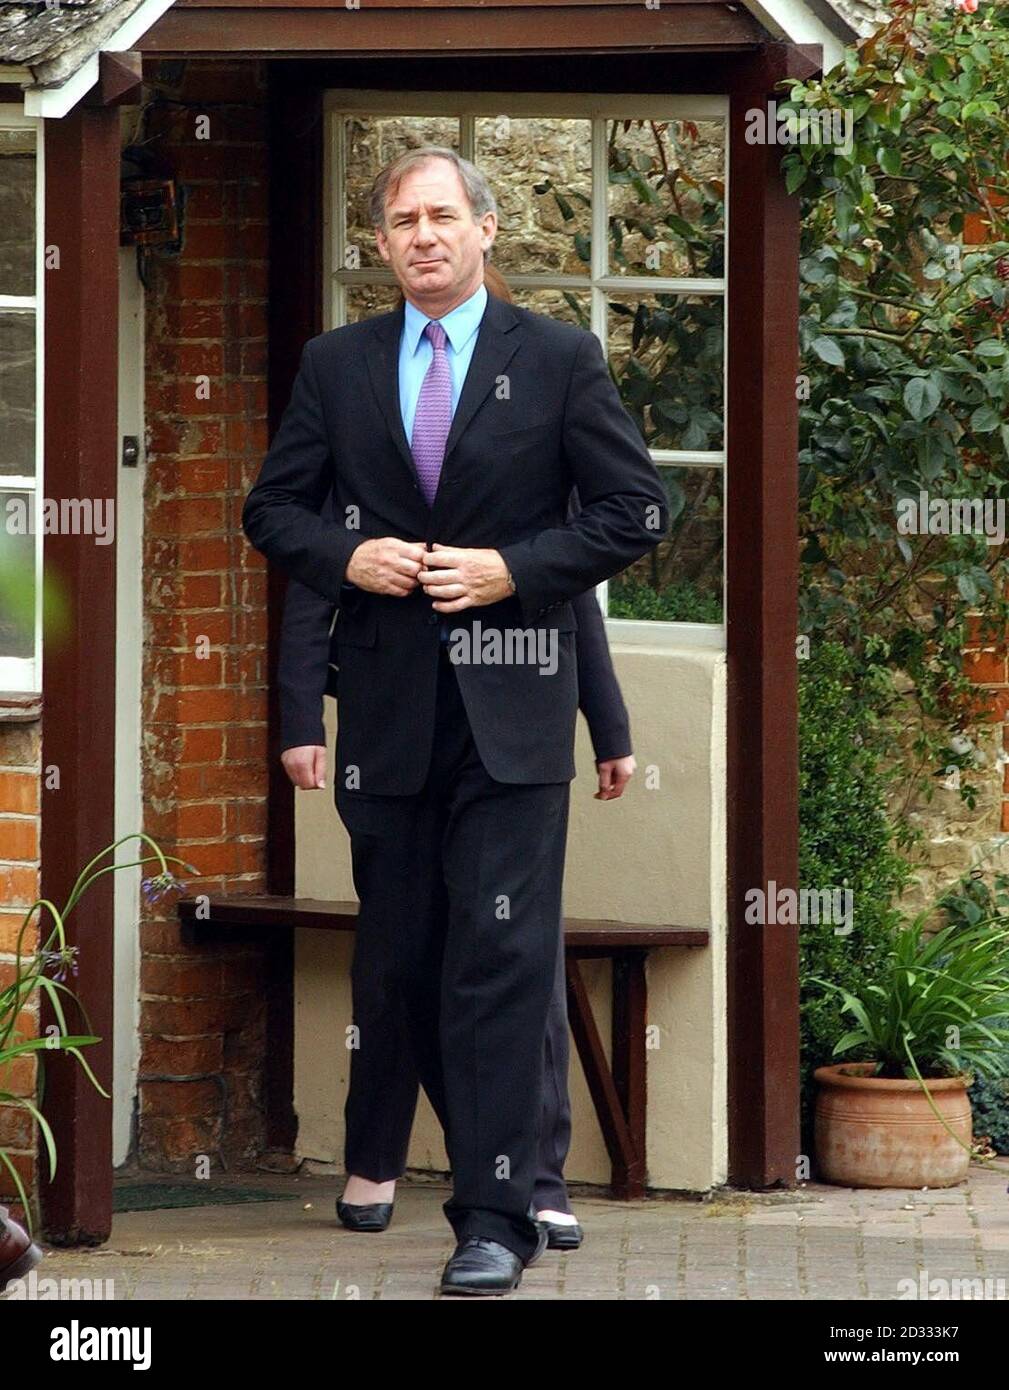 Defence Secretary Geoff Hoon leaves, after visiting Janice Kelly, the widow of scientist Dr David Kelly.  He spent just over an hour and a quarter at her home in Abingdon near Oxford. Stock Photo